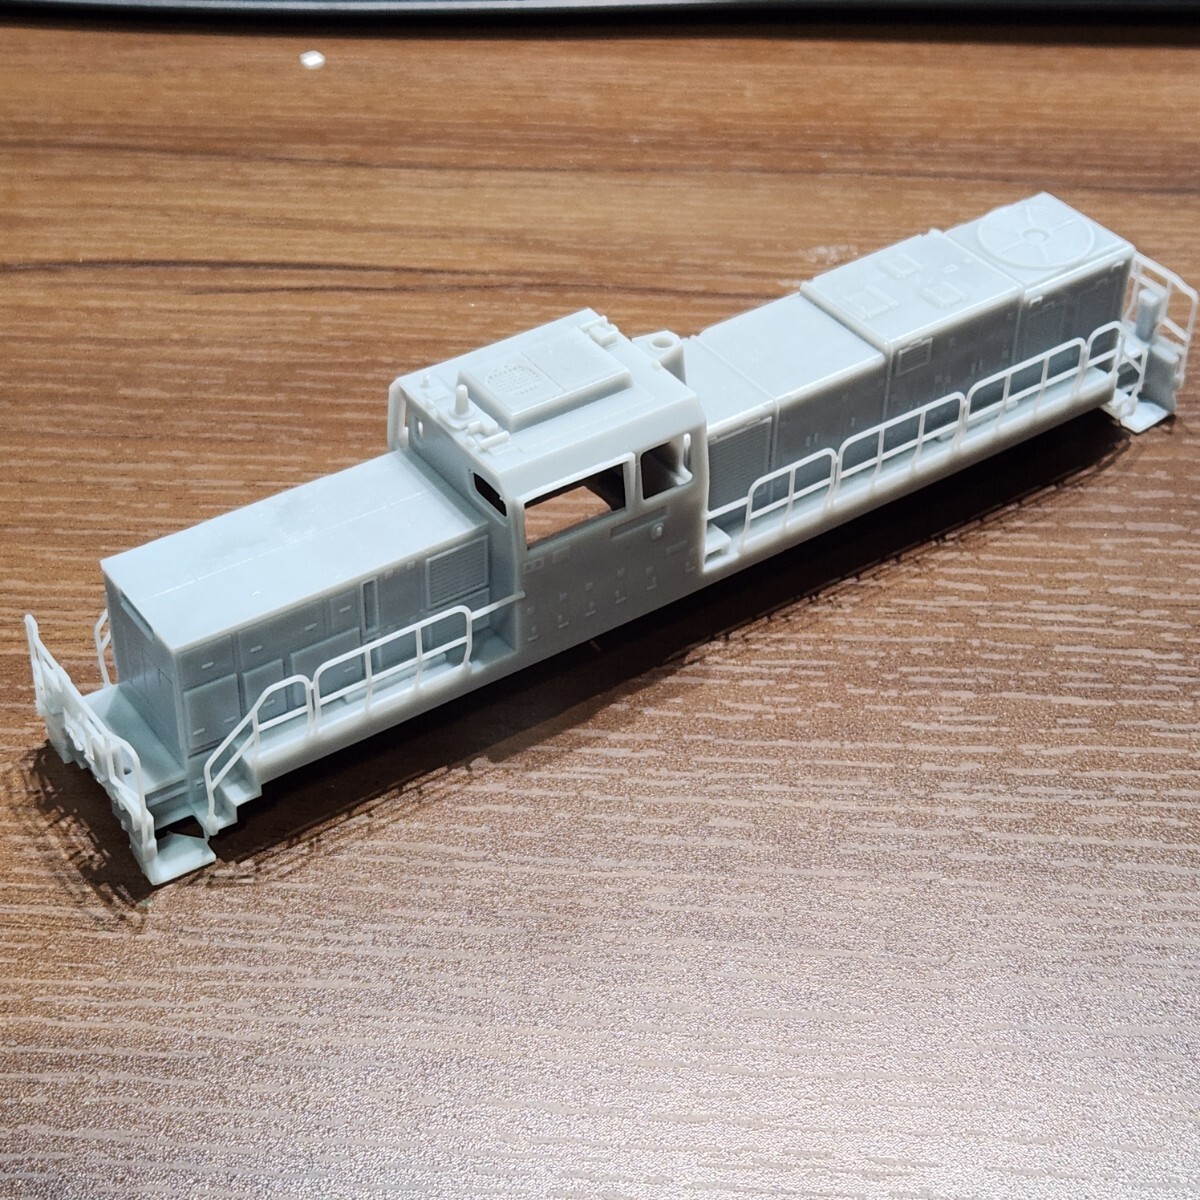 HO DD200 type 3D print goods handrail solid VERSION * output mistake equipped #16 number #1/80 #TOMIX #KATO # locomotive 